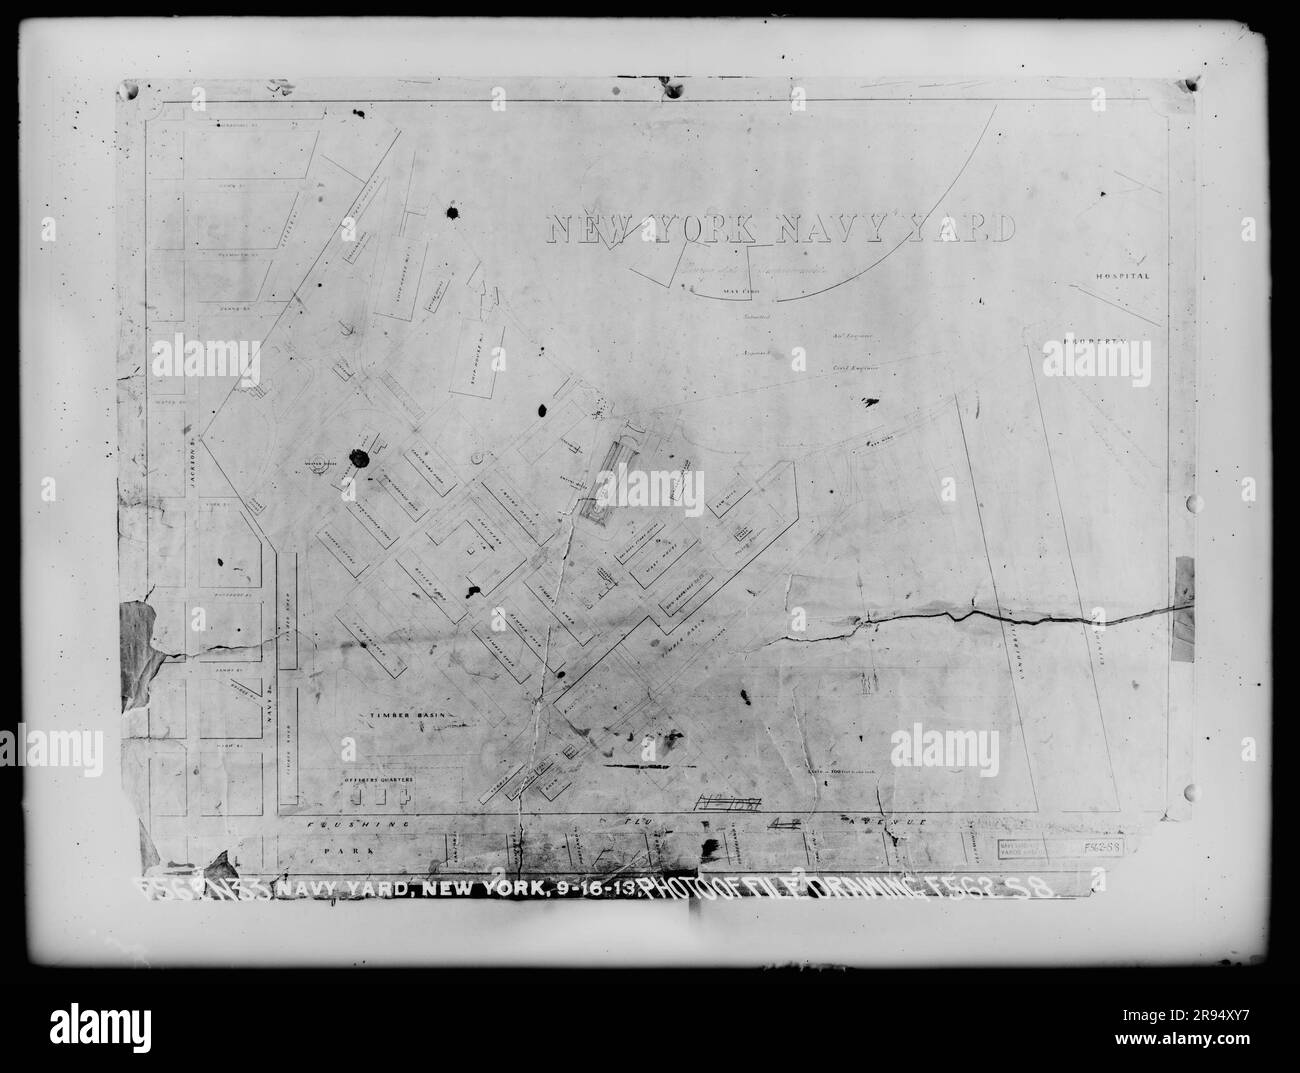 Photograph of File Drawing F562 S8. Glass Plate Negatives of the Construction and Repair of Buildings, Facilities, and Vessels at the New York Navy Yard. Stock Photo